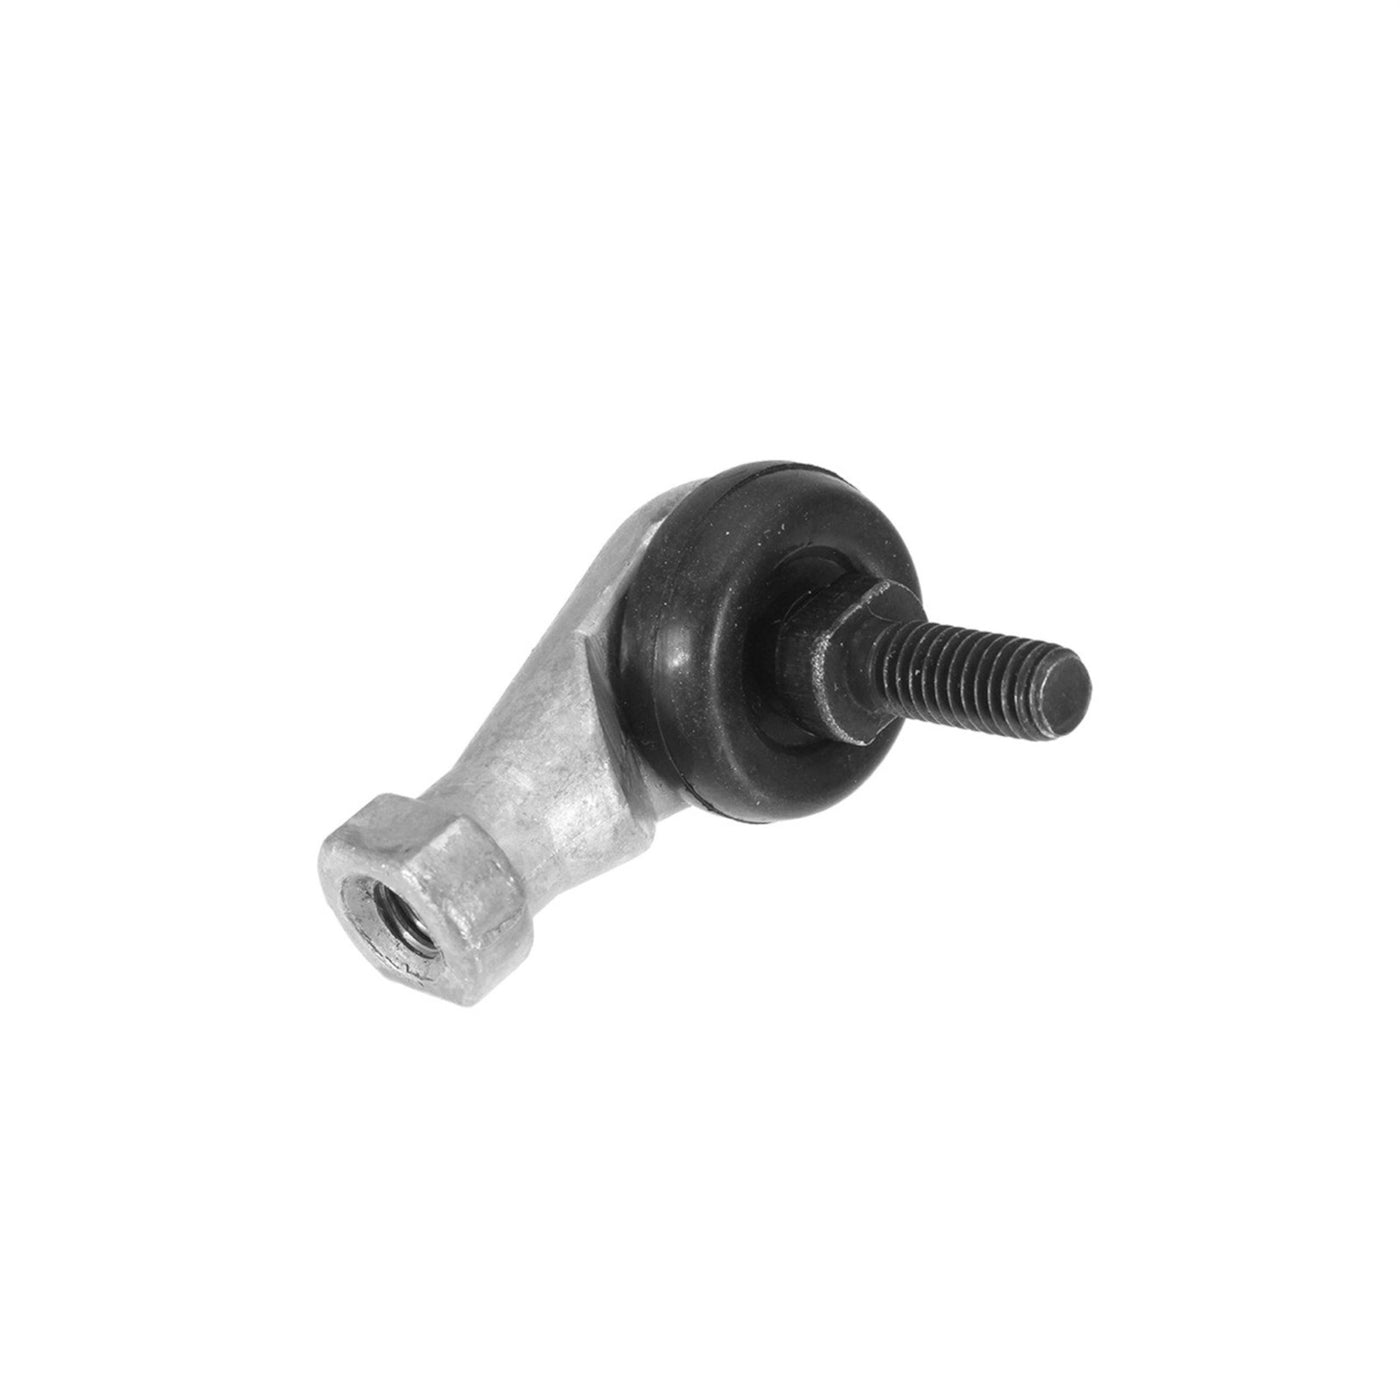 M6 male/female 90 degree ball joint